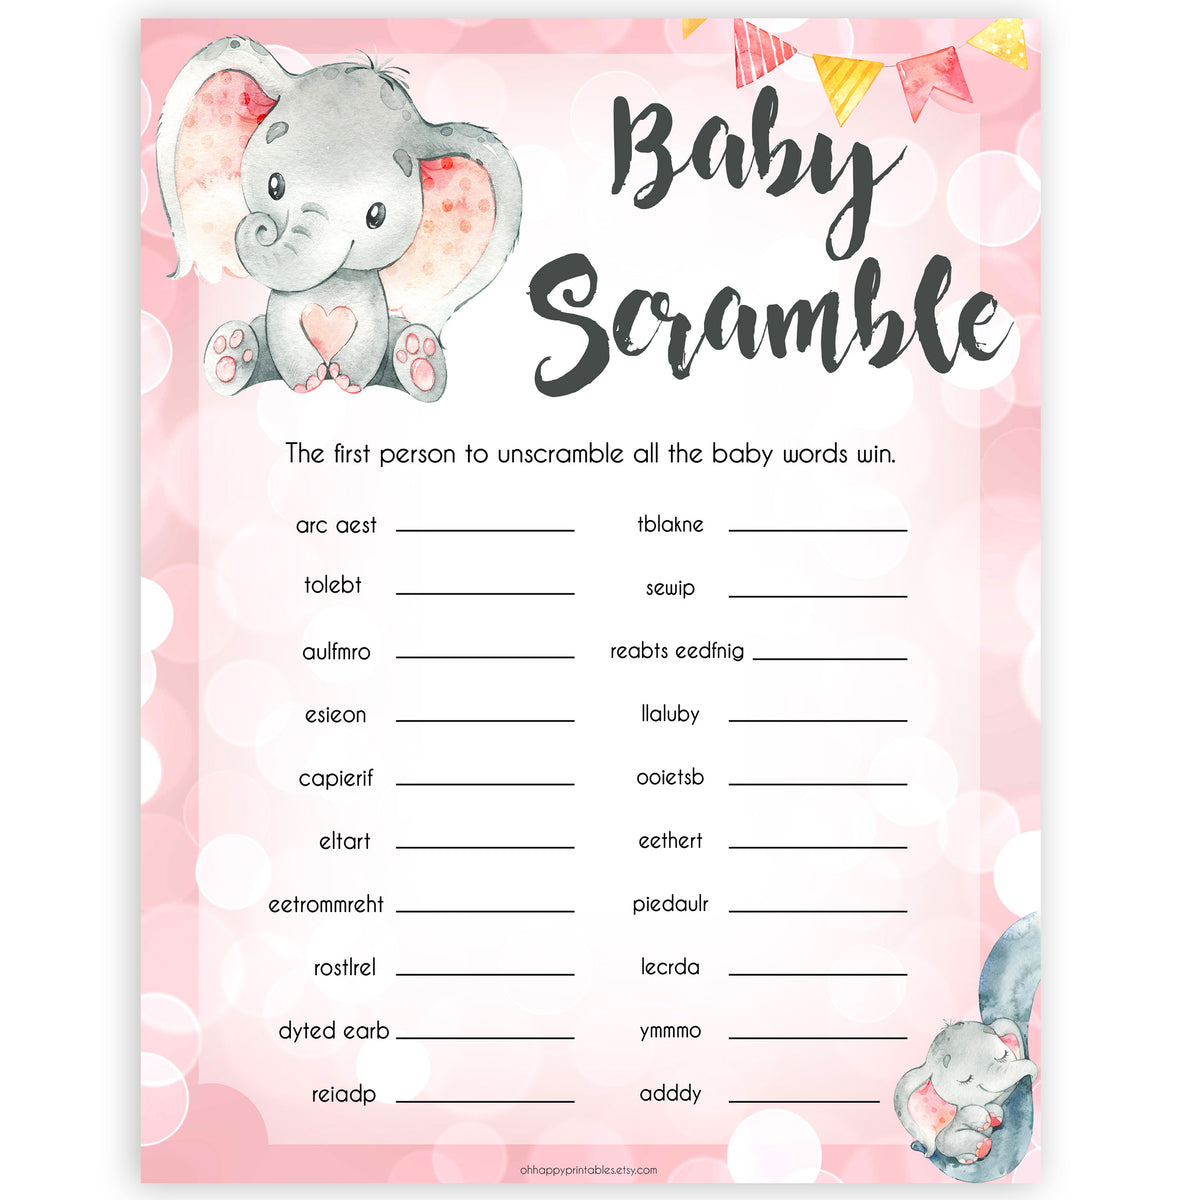 free-printable-baby-shower-games-a-to-z-create-and-edit-free